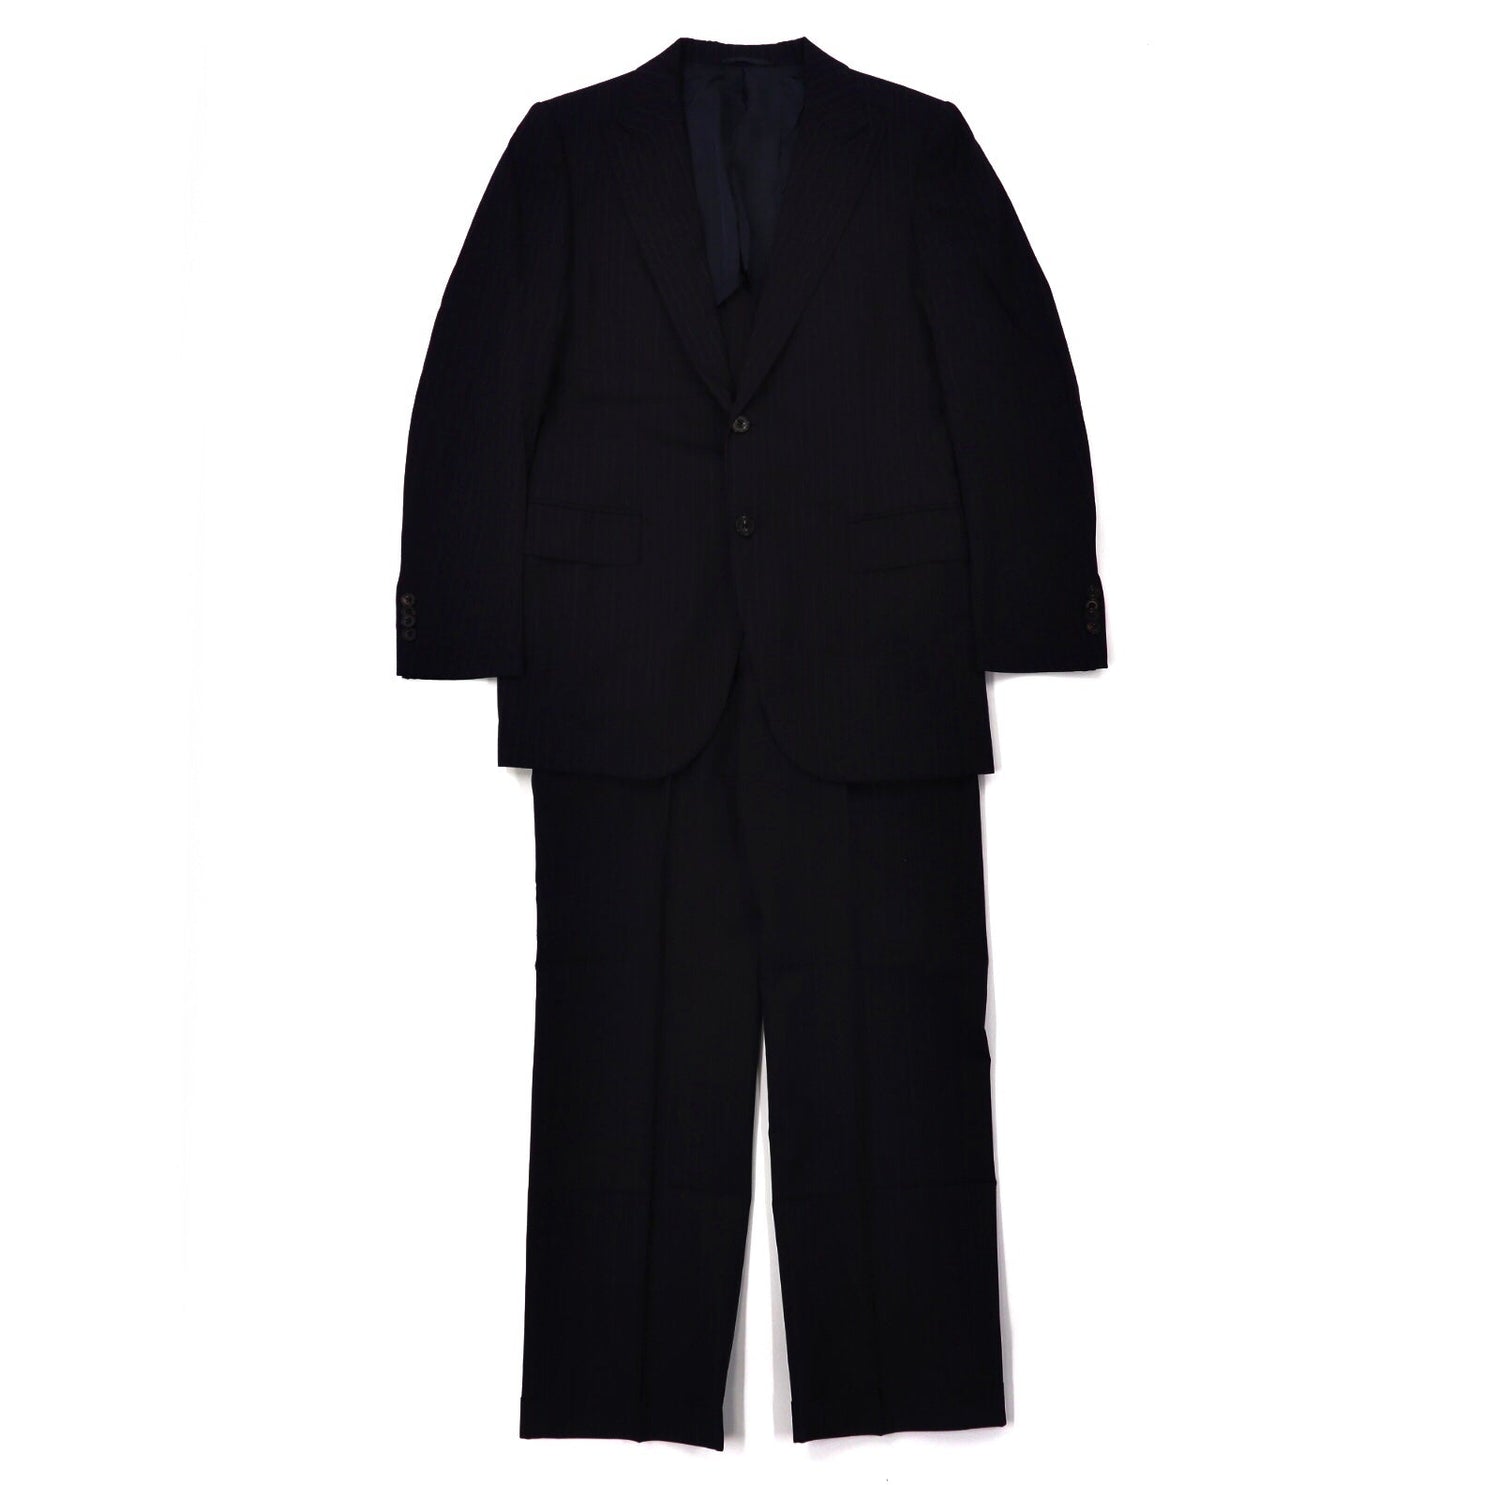 United ARROWS 2B Setup Suit 42 Navy Striped Wool Made in Japan 